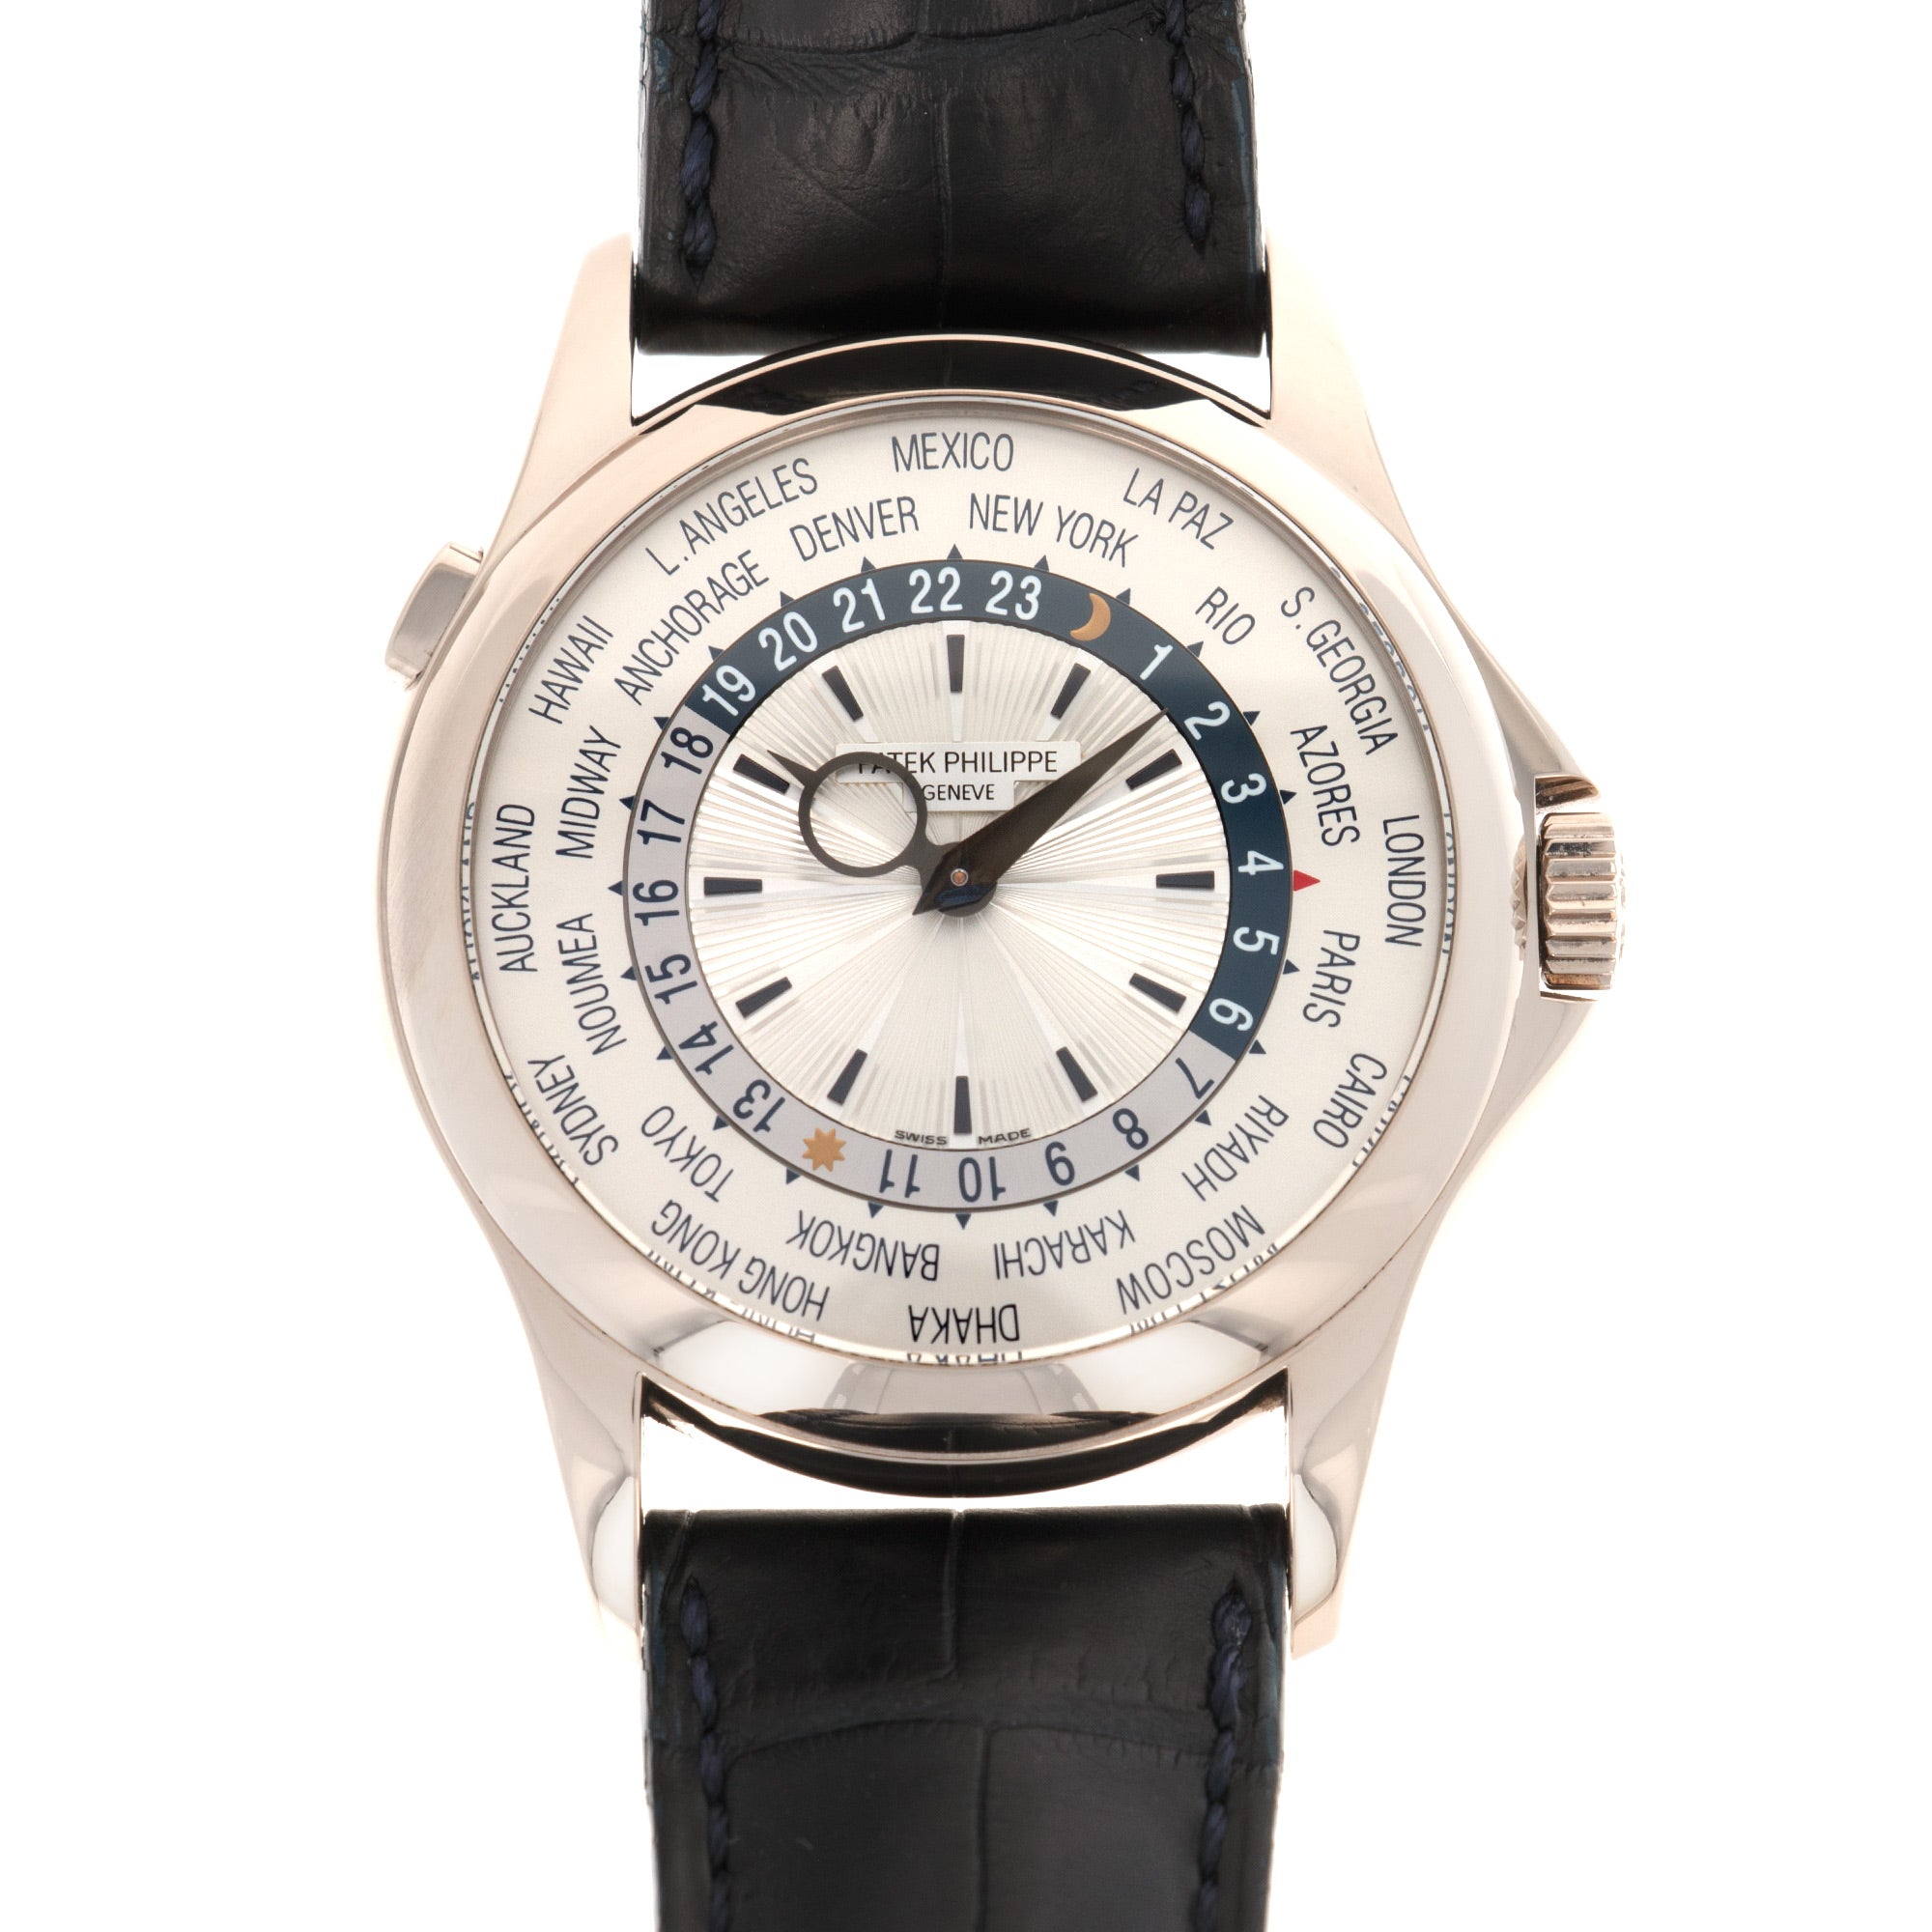 Patek Philippe White Gold World Time Watch Ref. 5130, Retailed by Tiffany &amp; Co.